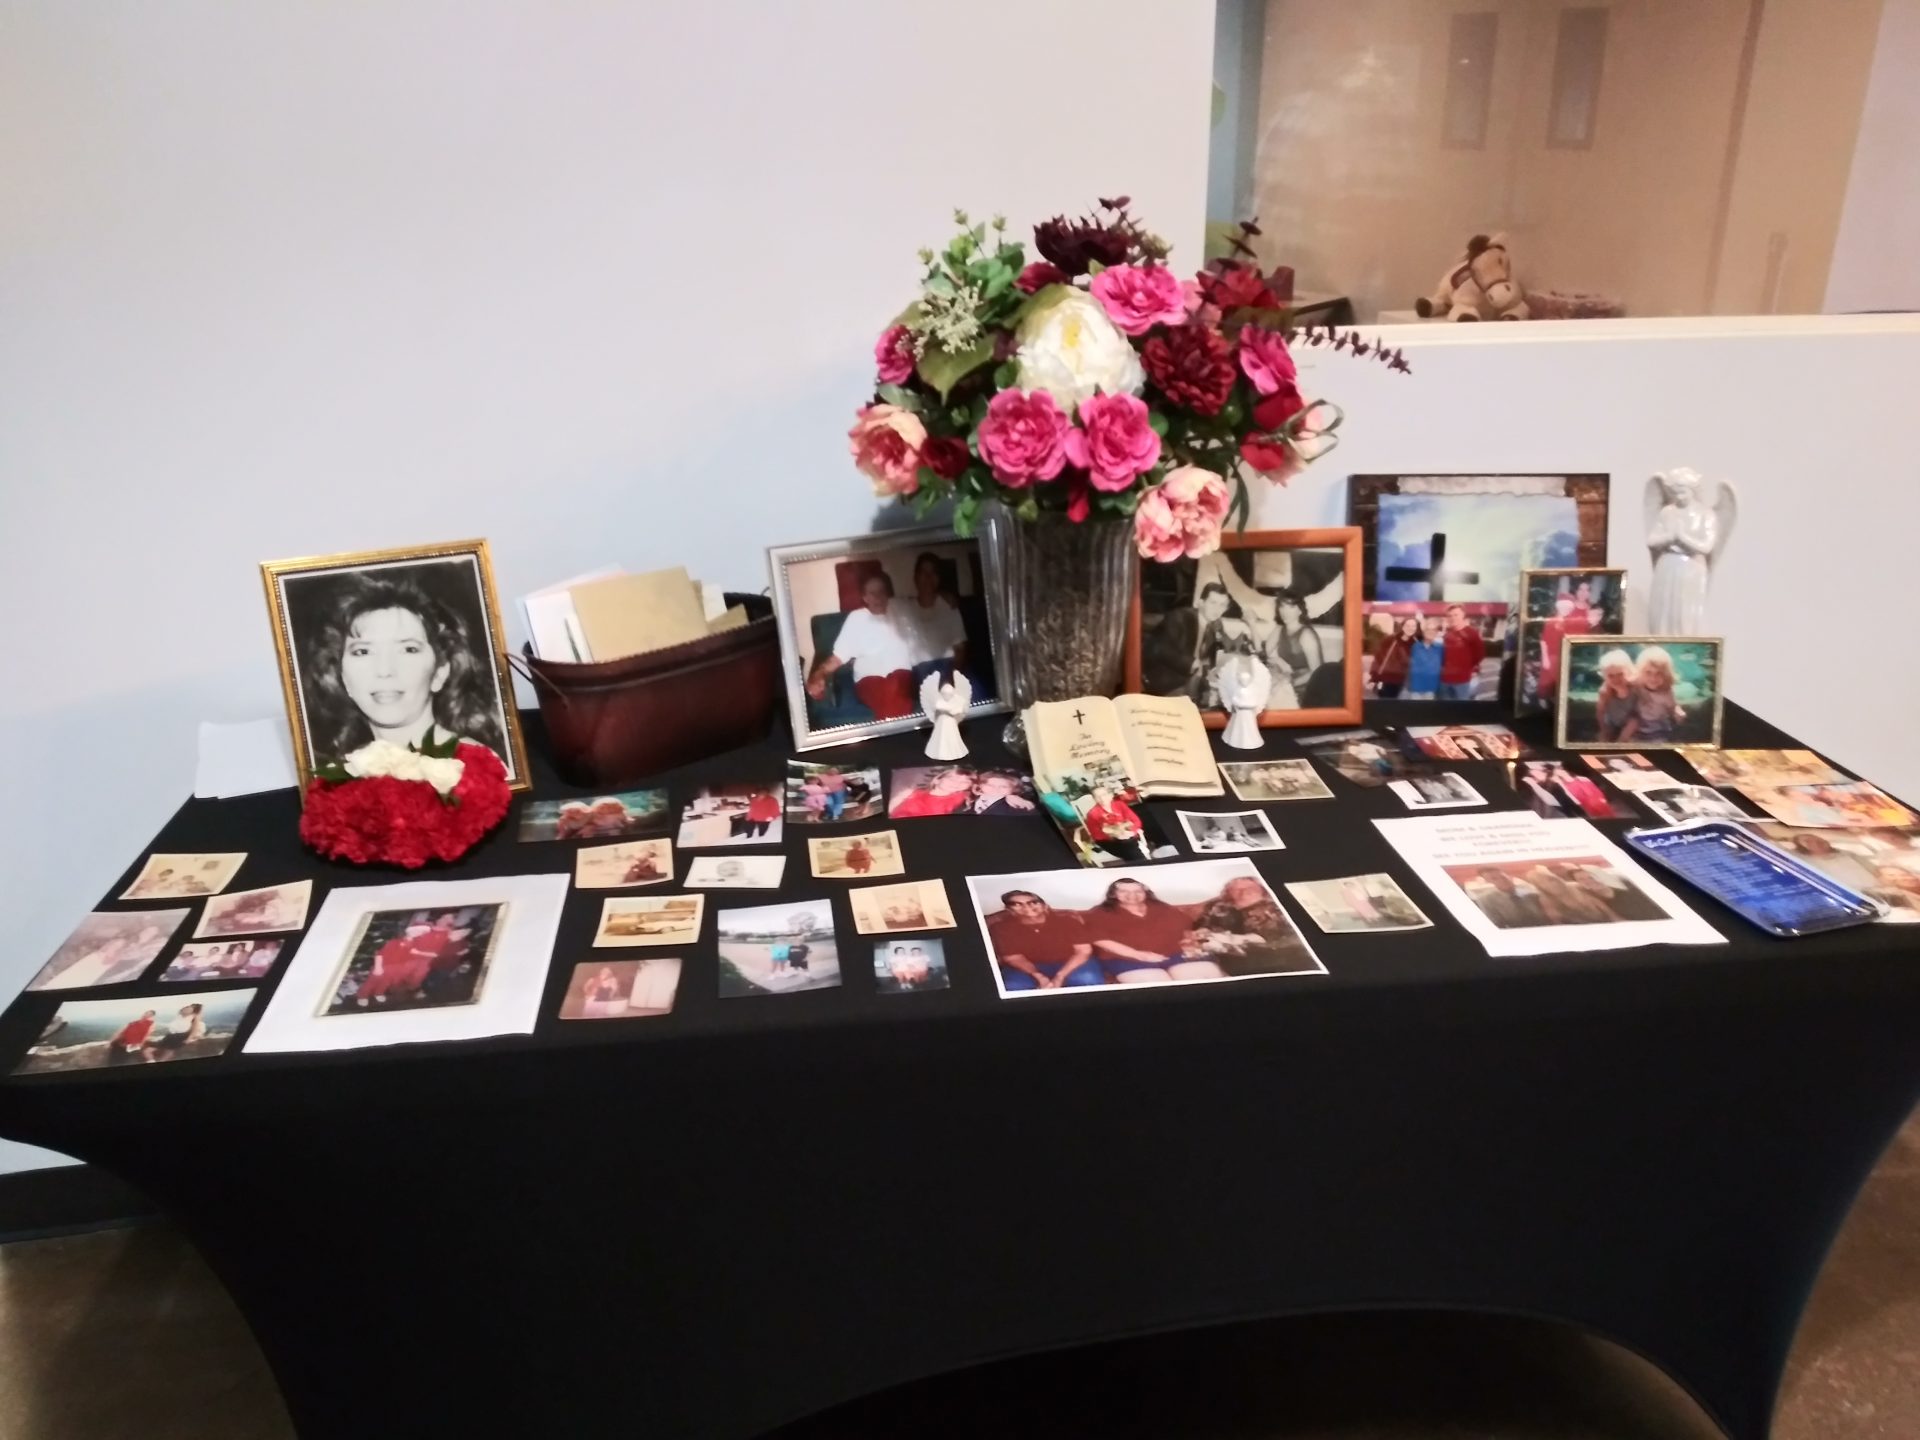 Table of Pictures of Evelyn's Life, Family and Friends at Memorial.